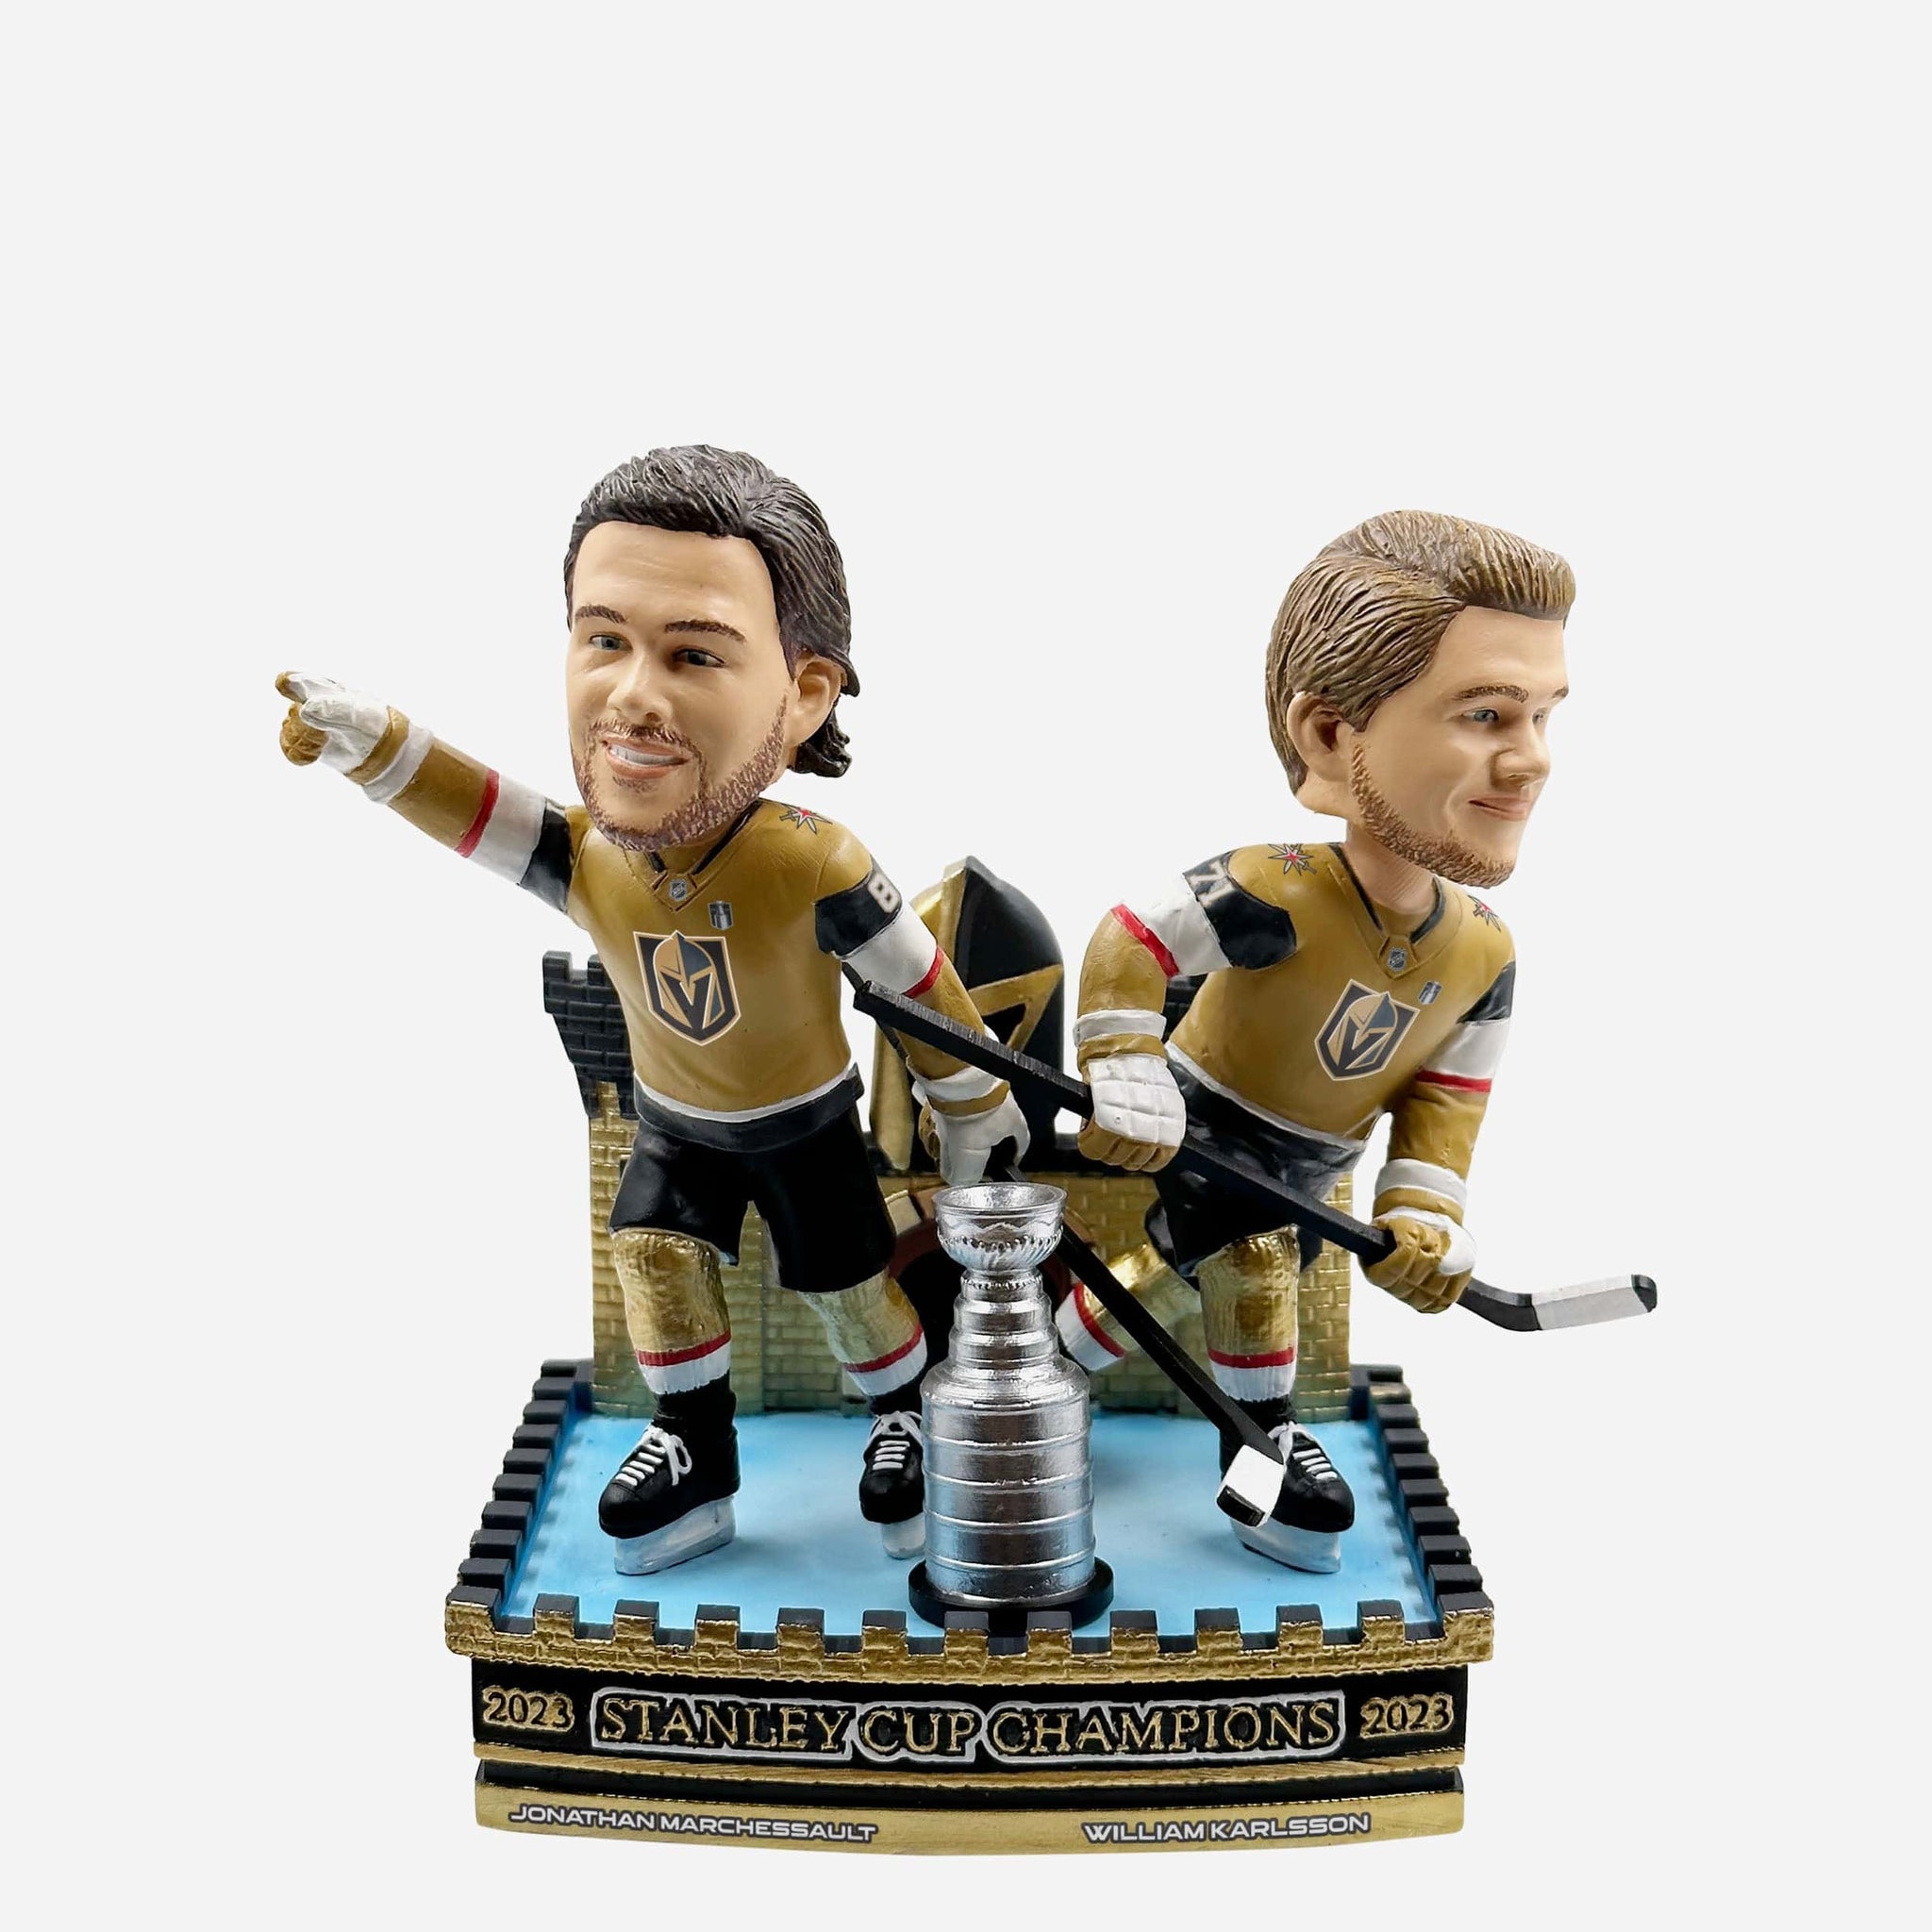 2023 Stanley Cup Champions Fan Cave Decor - Vegas Golden Knights